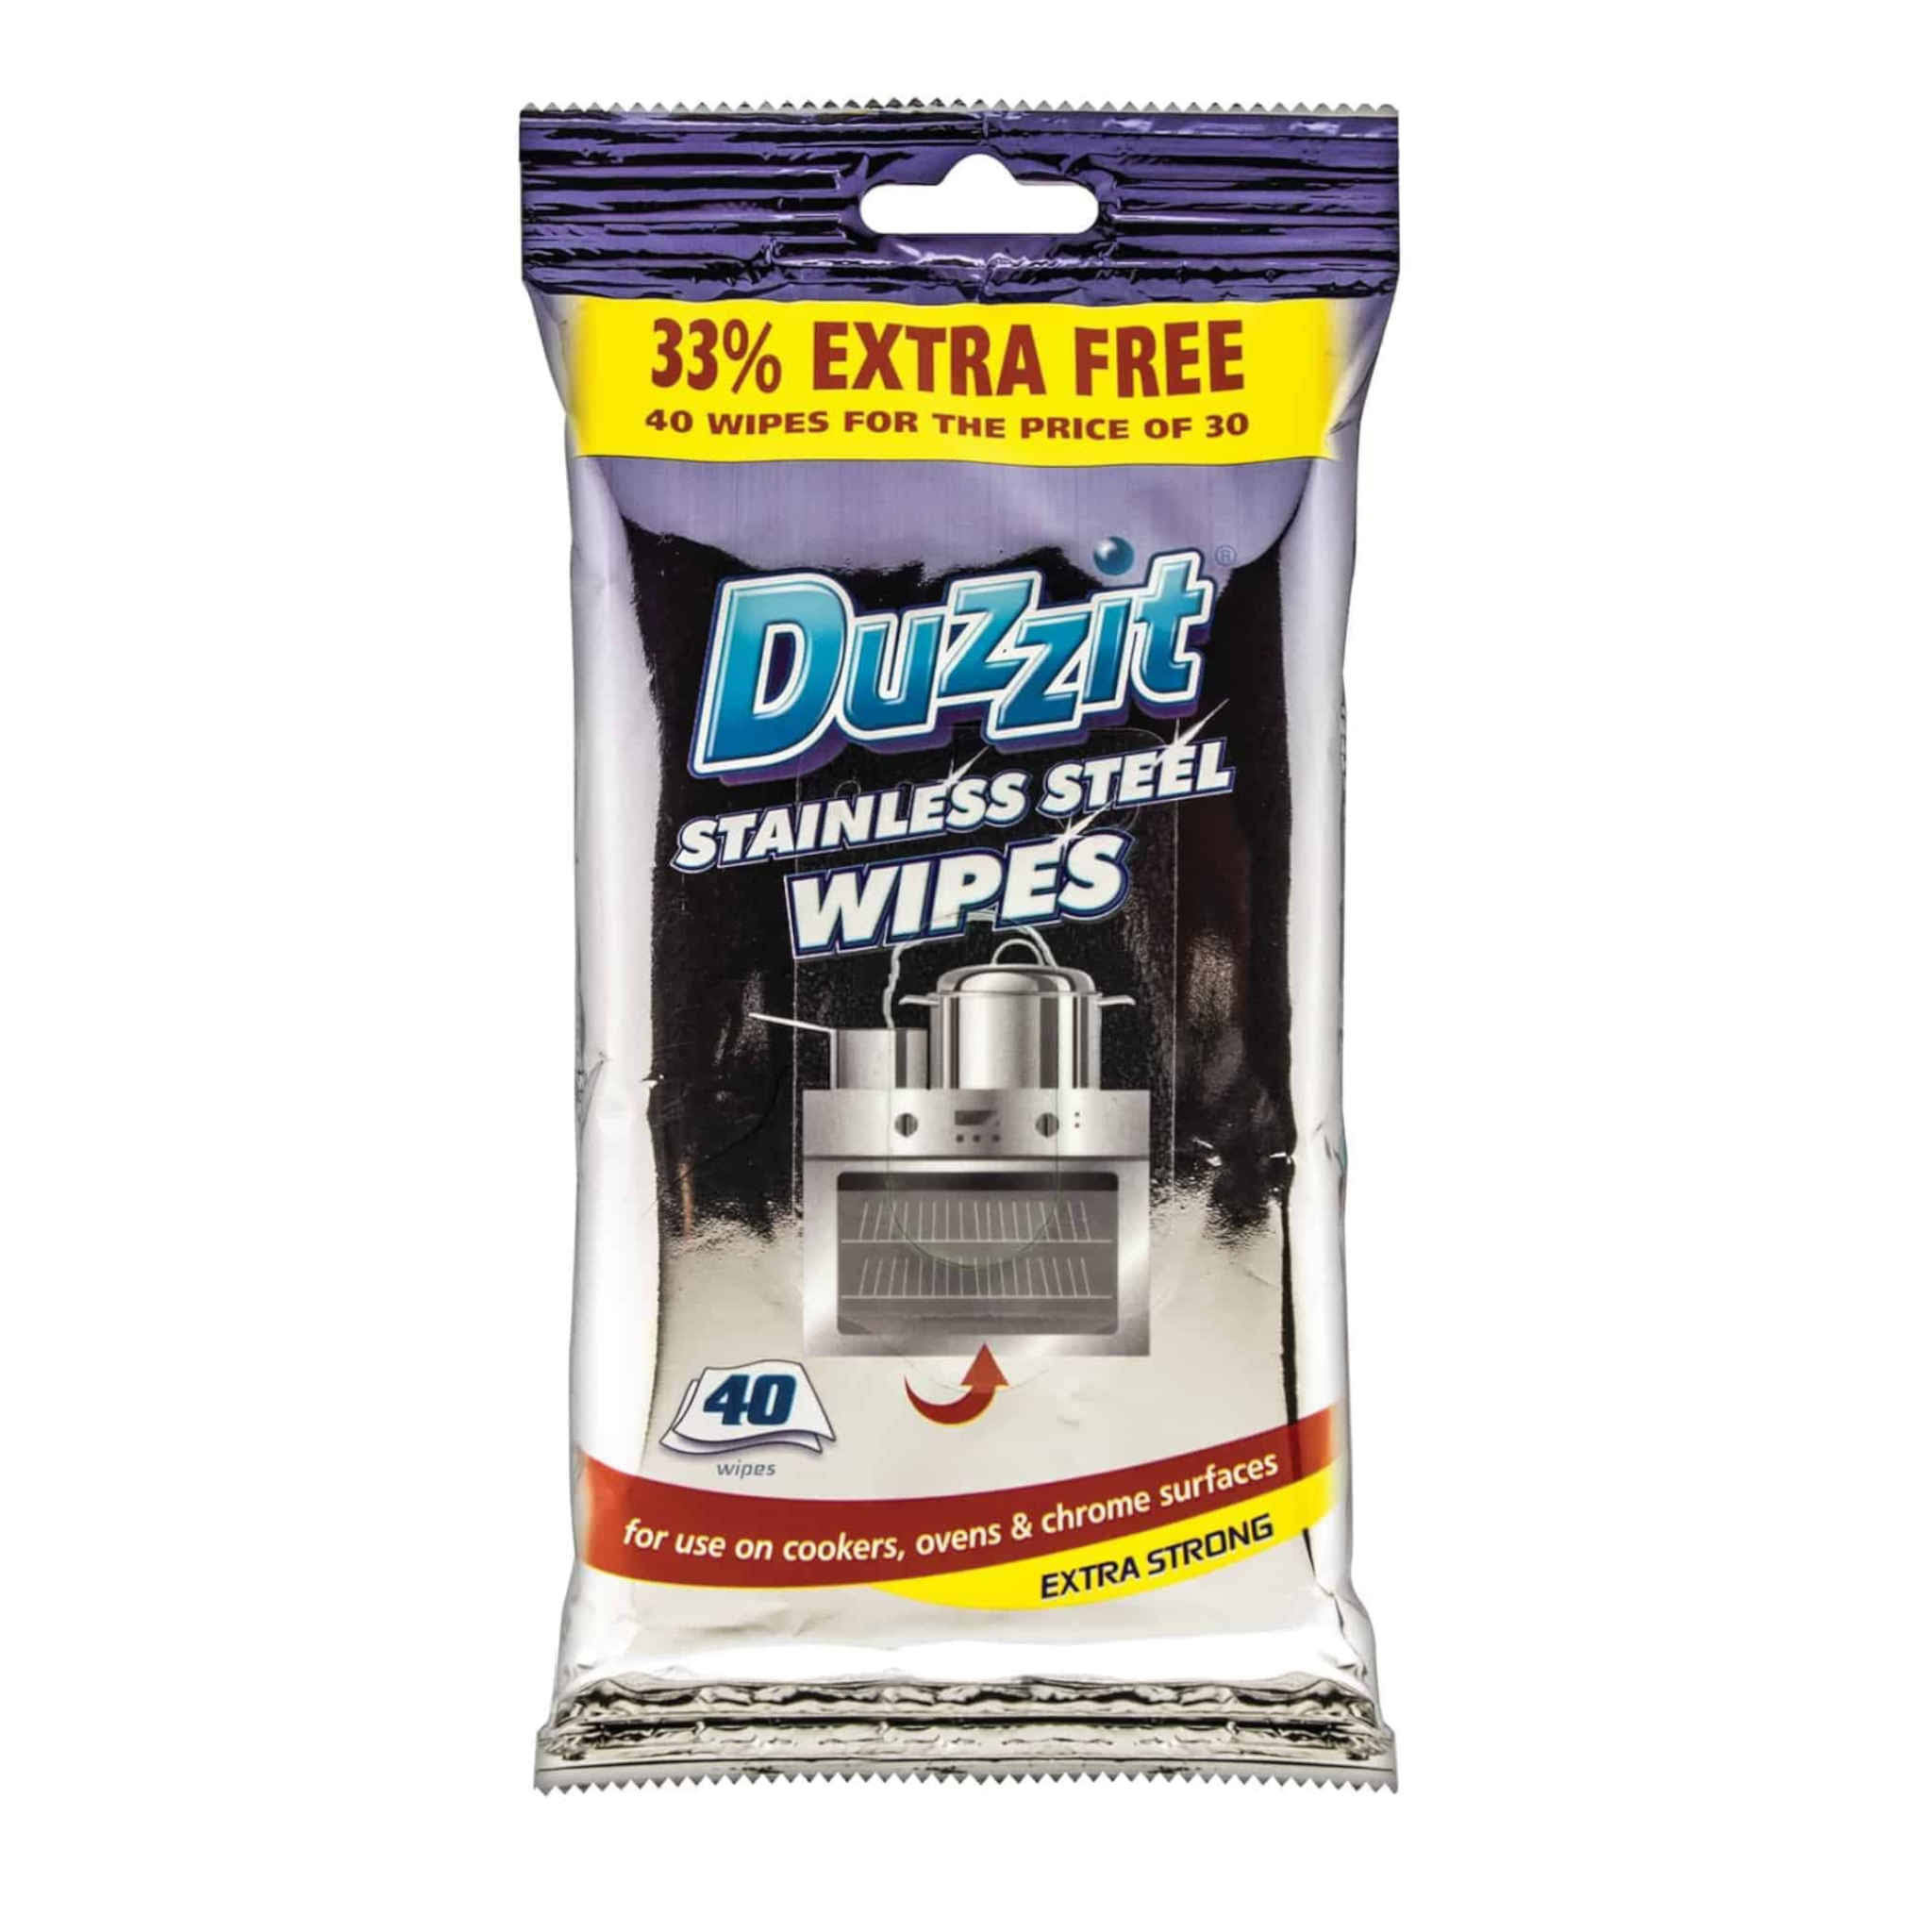 Duzzit Stainless Steel Wipes - 40 pack